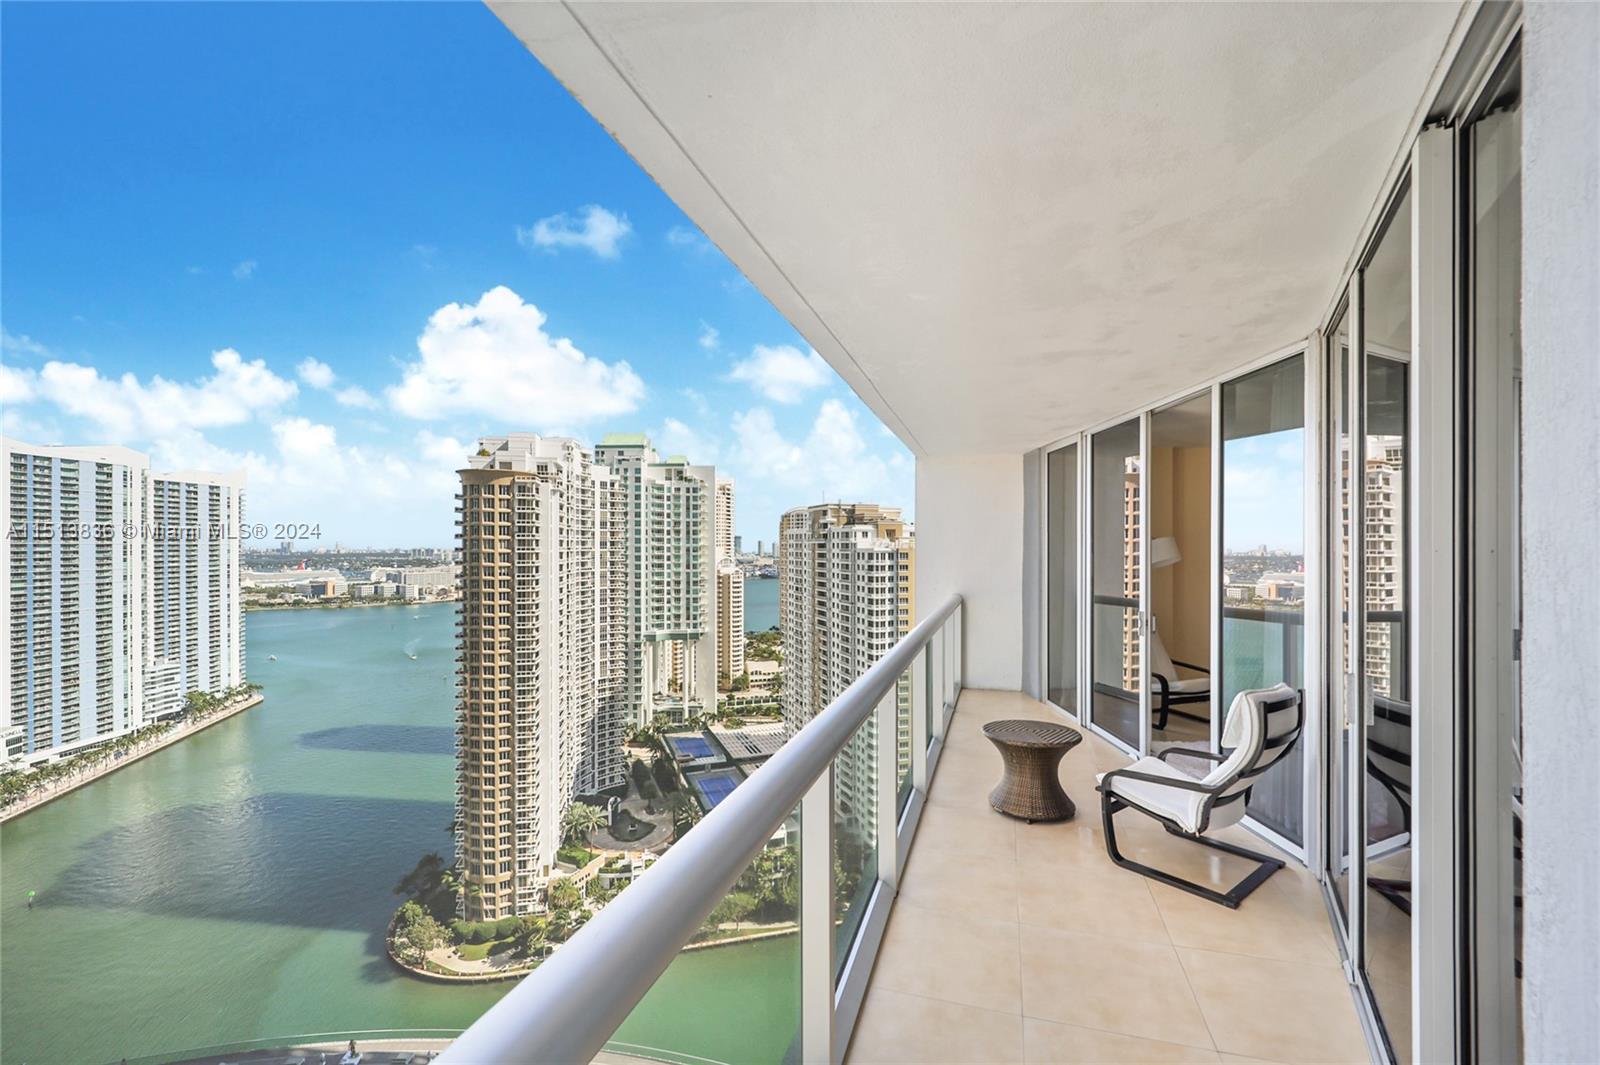 This beautiful very well kept one bedroom condo in Icon Brickell can be sold furnished or unfurnished. This an amazing opportunity for someone looking to live in Brickell. This
30th-floor condominium offers great living space and a beautiful balcony overlooking the Biscayne Bay. Enjoy the resort style amenities of Icon Brickell, including a state-of-the-art
fitness center, spa, and resort-style pool deck. Experience the luxurious living in the heart of Brickell